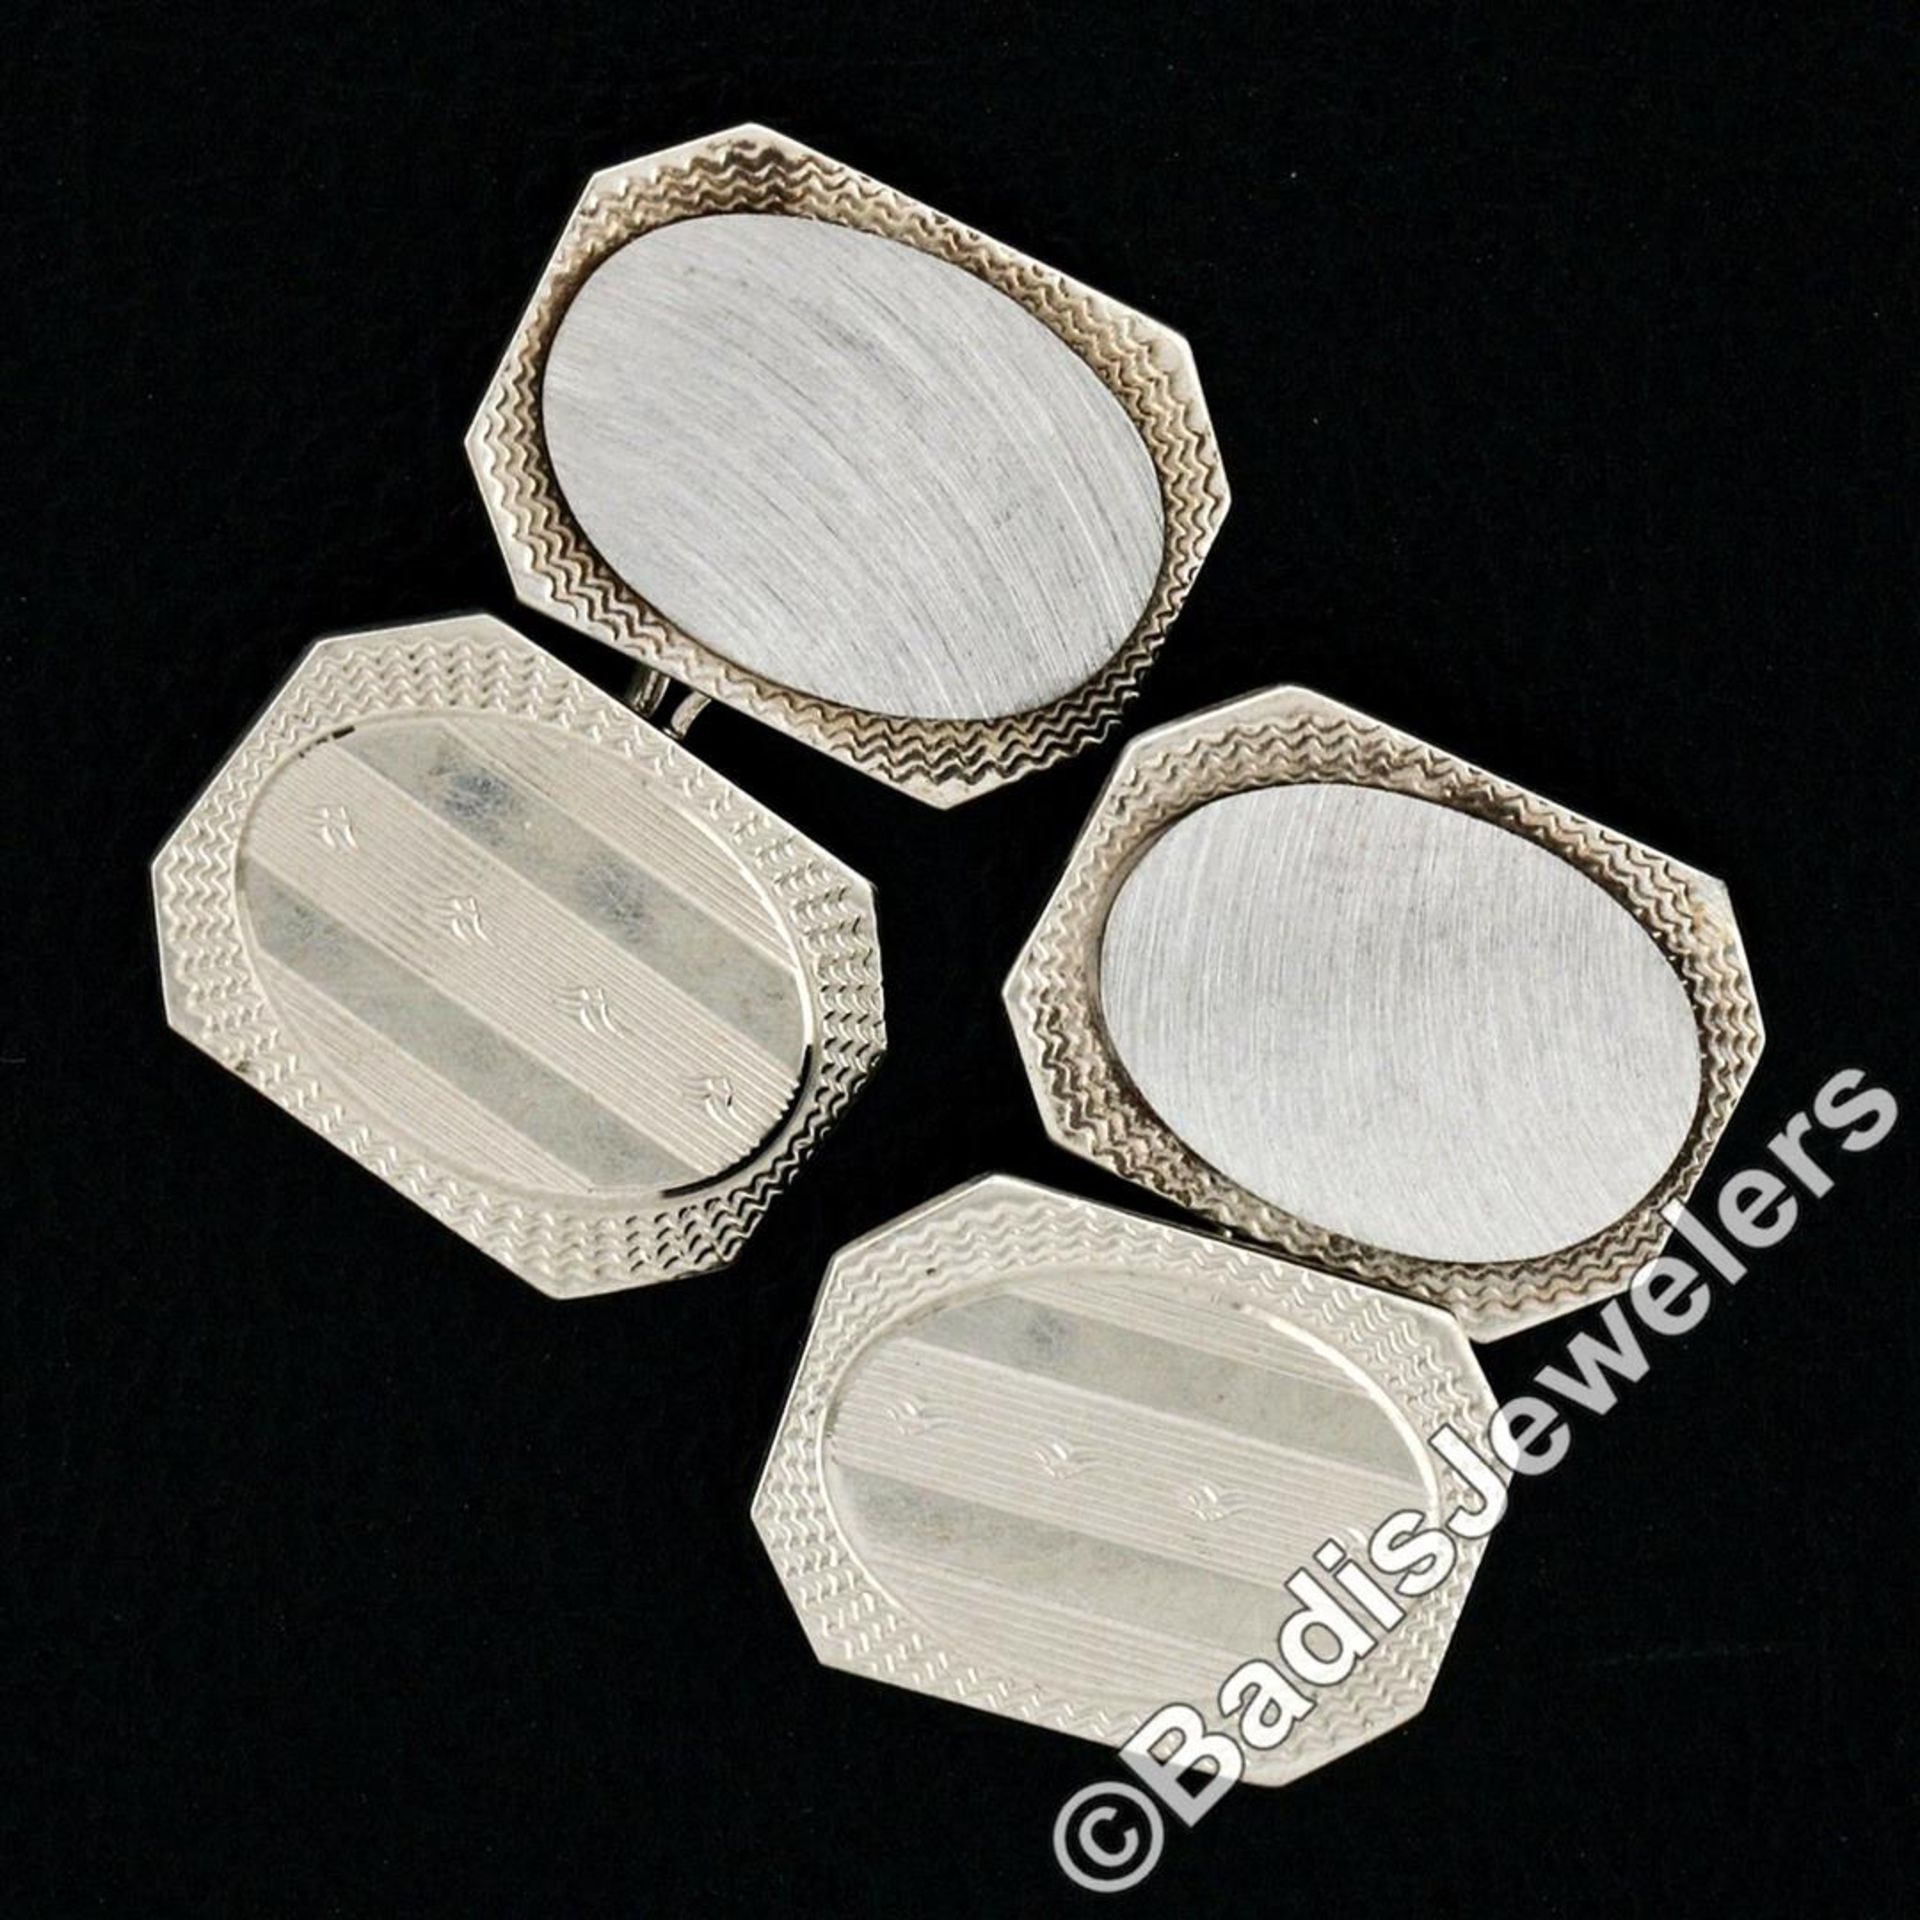 Antique Art Deco 14kt White Gold Etched Dual Panel Cuff Links - Image 2 of 5